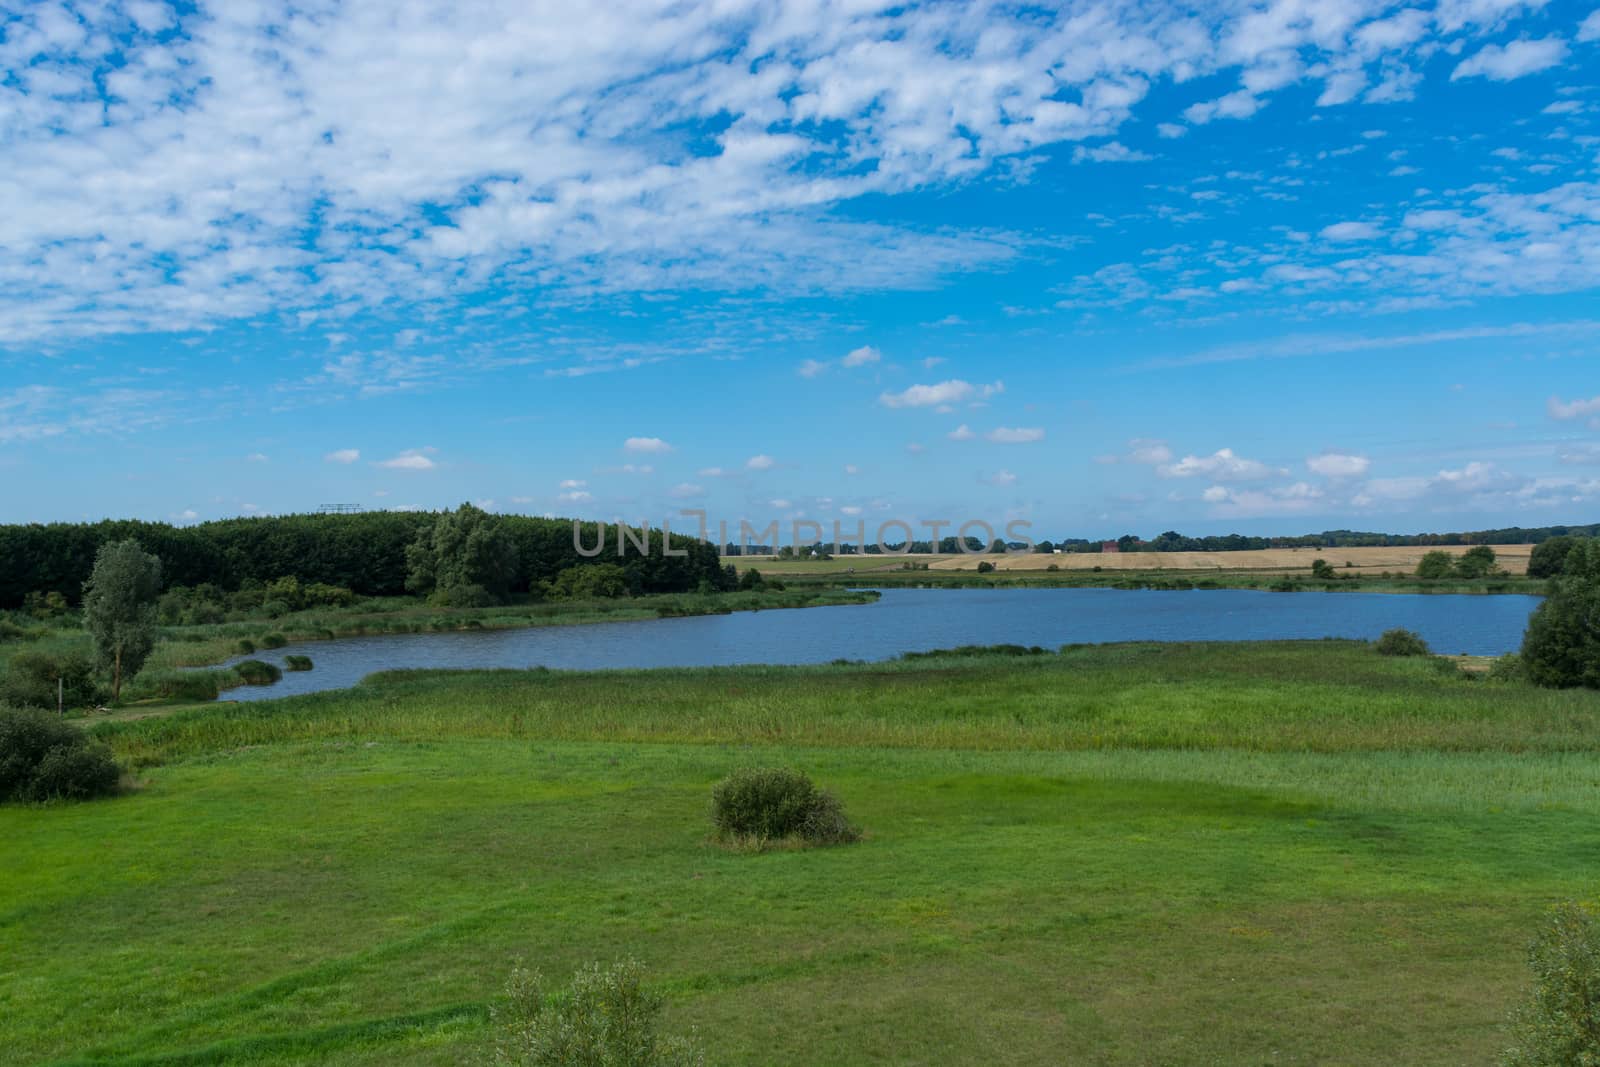 Panoramic view of the swimming, fishing and nature area Eixen lake. Shot from the lookout tower